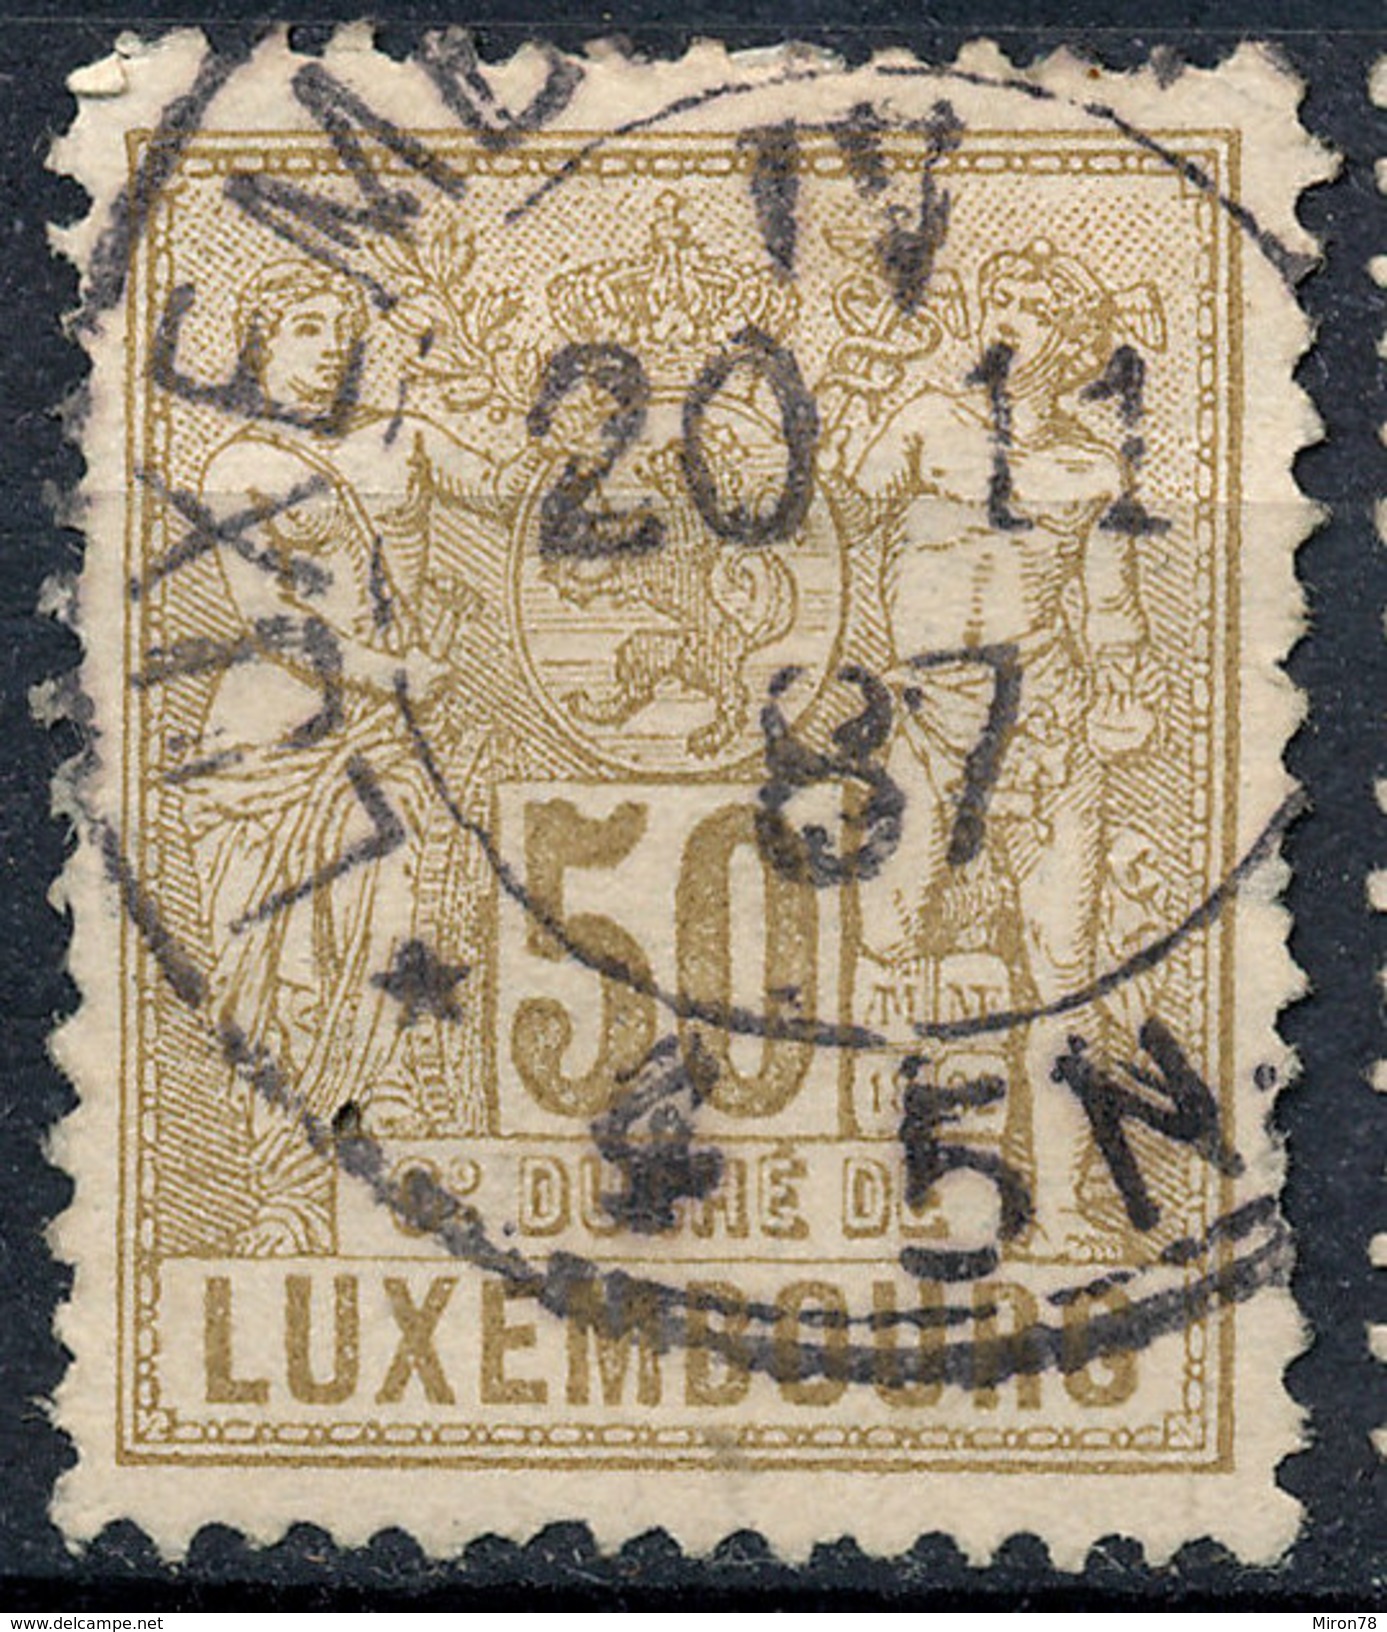 Stamp  Luxembourg 1882  50c  Used Lot#38 - 1859-1880 Armoiries